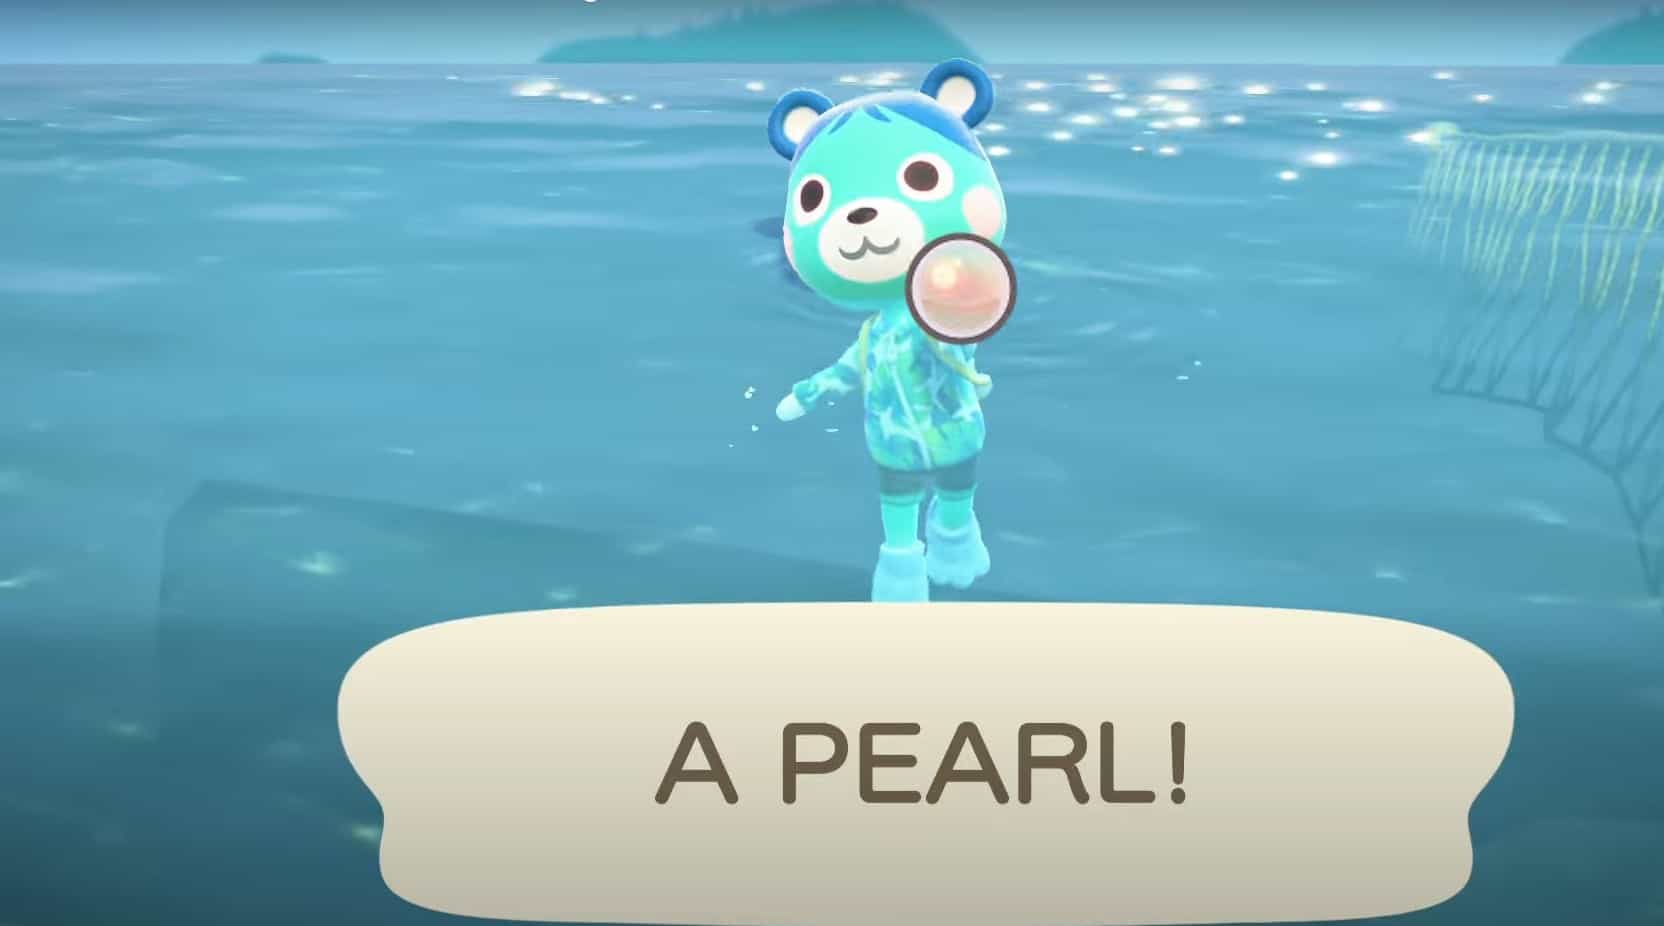 How To Farm Pearls In Animal Crossing New Horizons